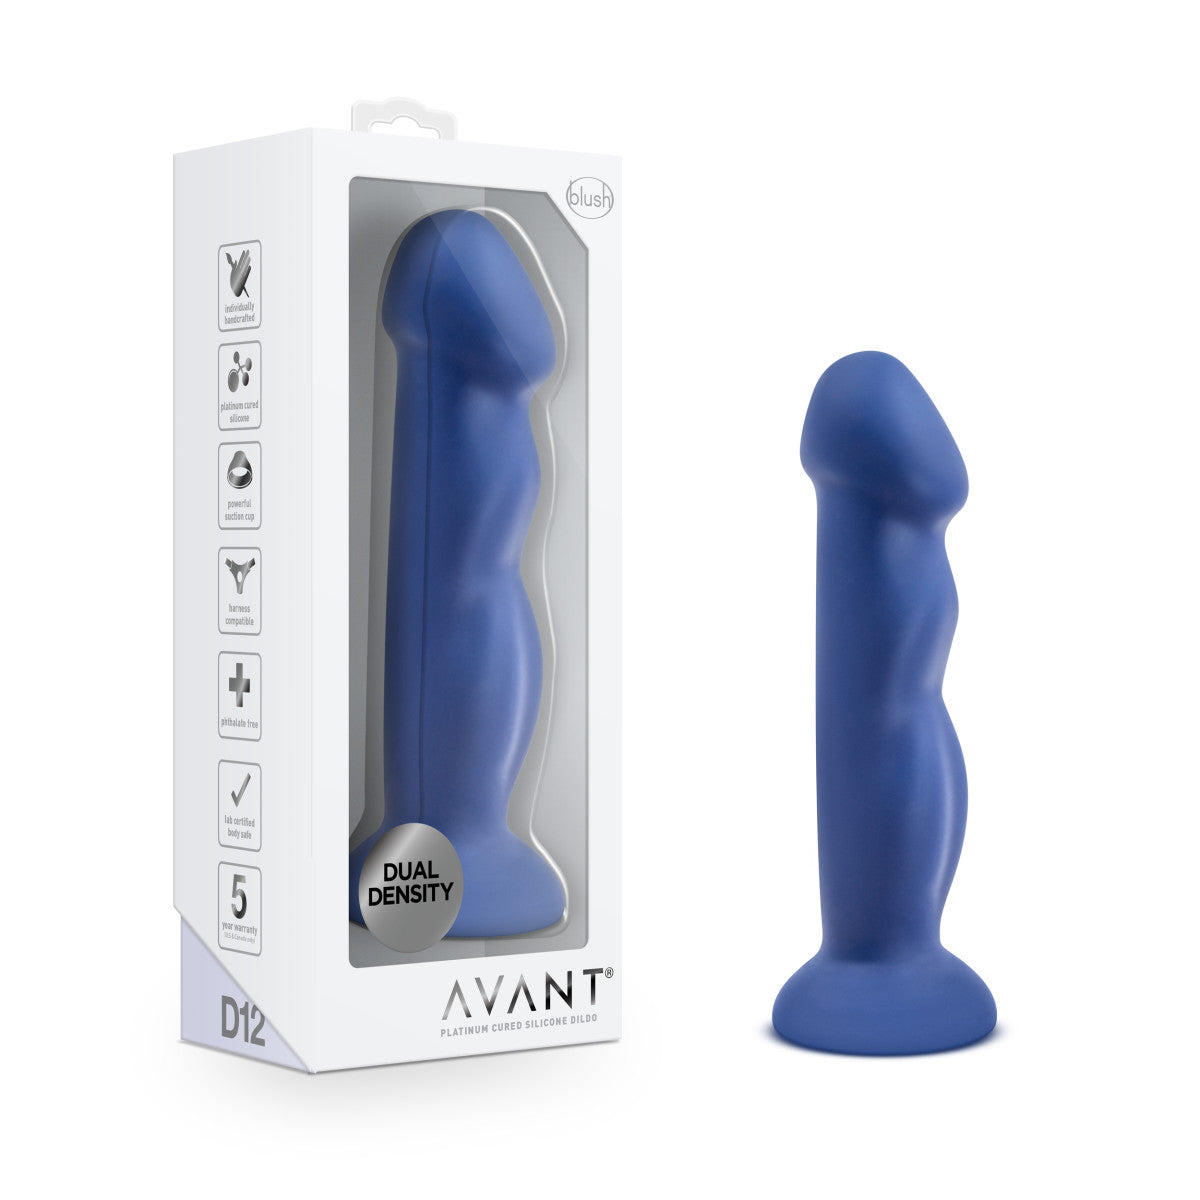 Avant | Suko Indigo D12: Artisan 8 Inch Curved G-Spot Dildo with Suction Cup Base - Elegantly Made with Smooth Ultrasilk® Purio™ Silicone